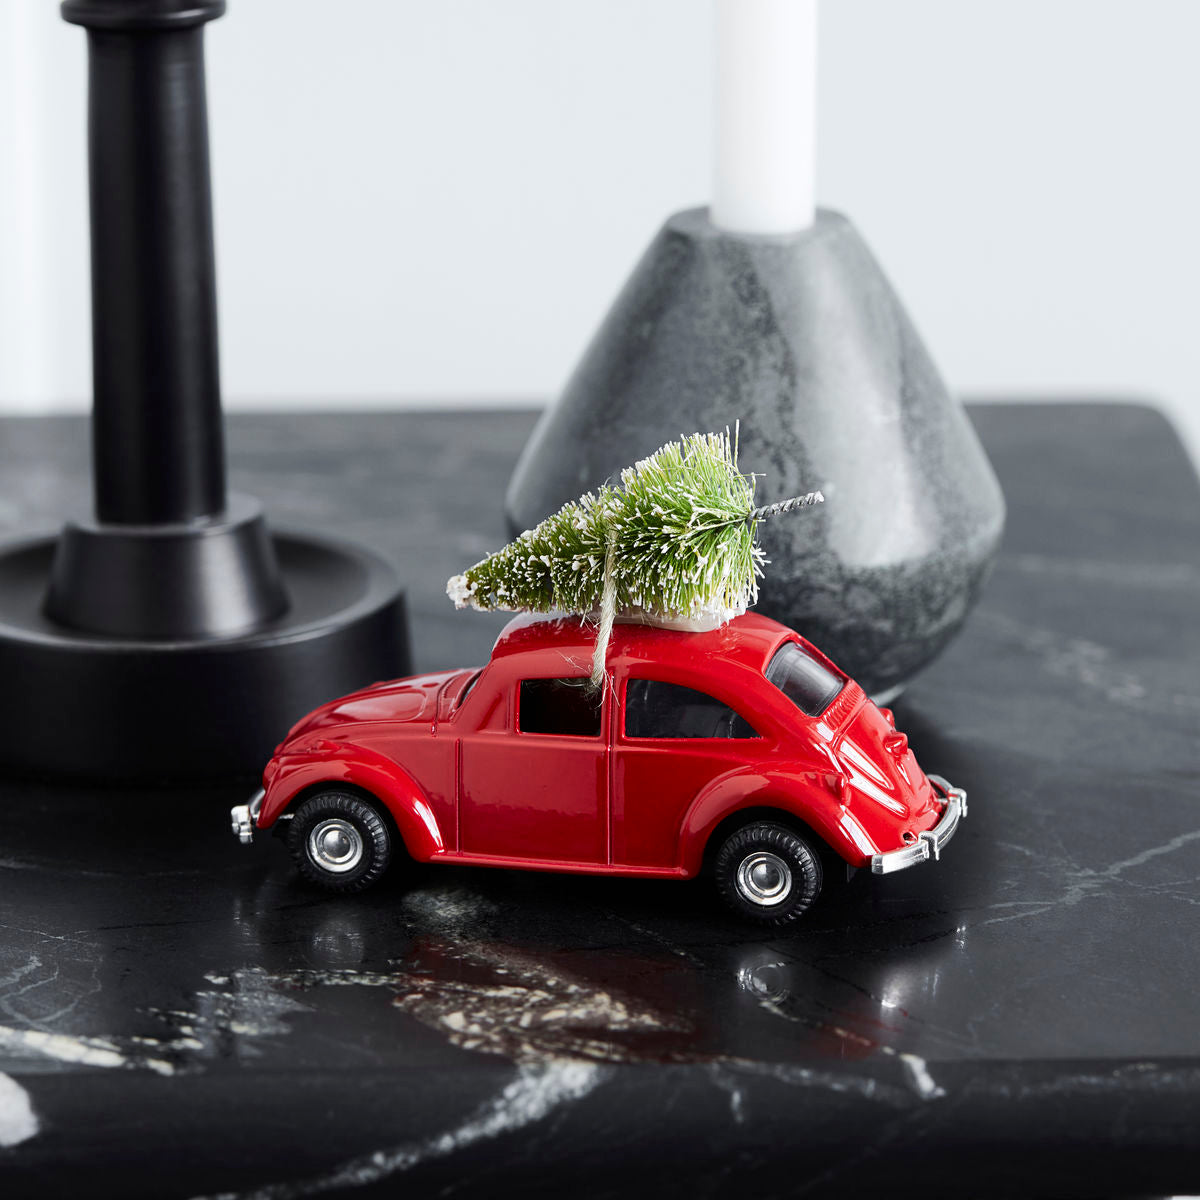 Gry & Sif rotes Auto mit Weihnachtsbaum